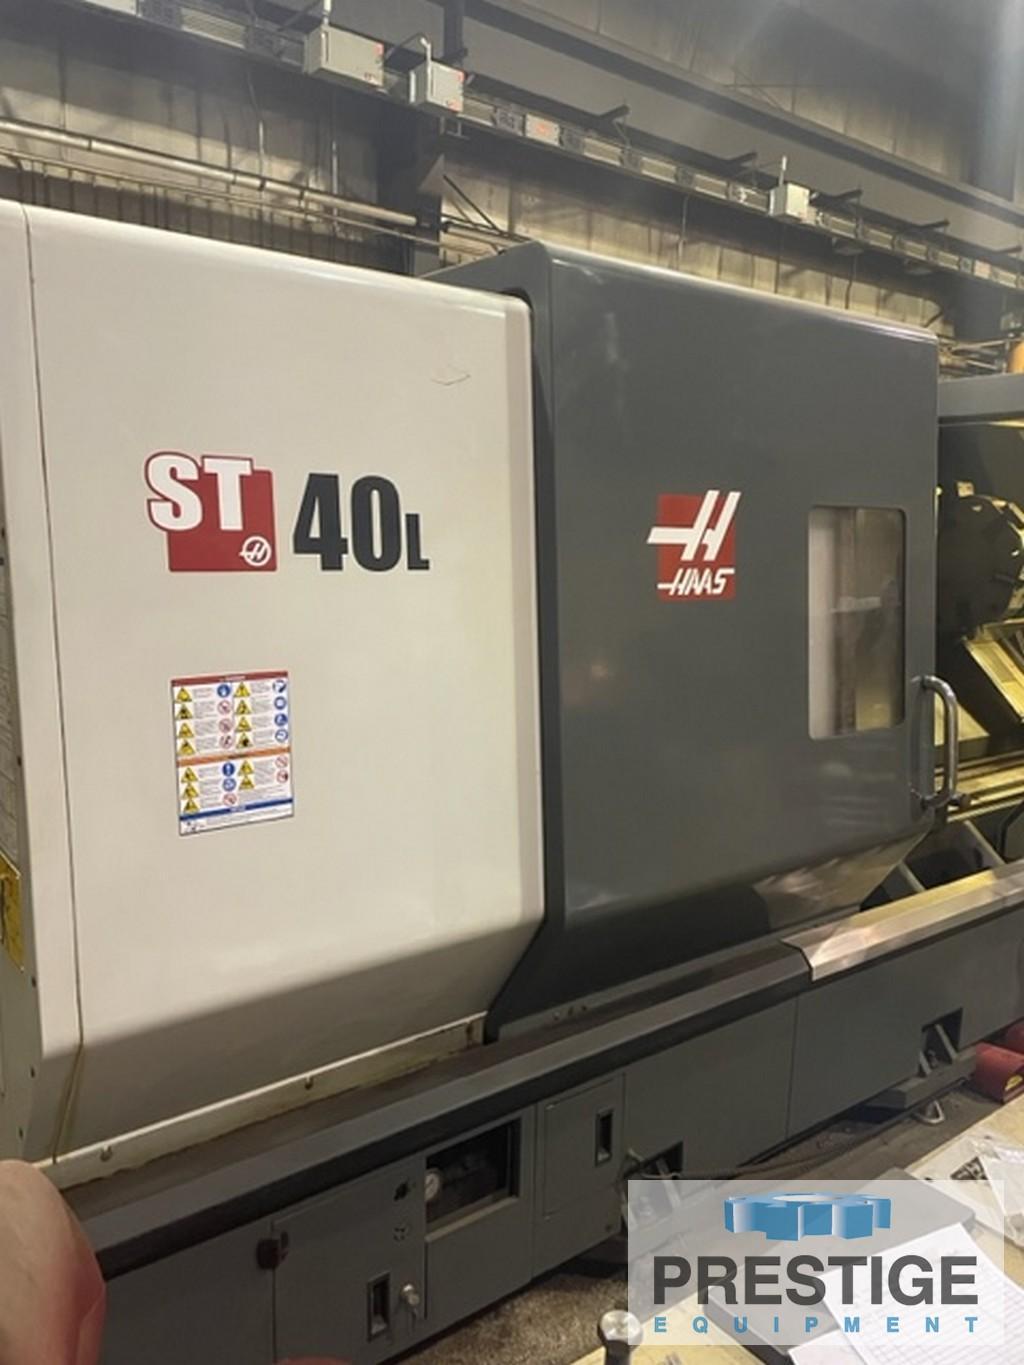 Haas ST-40L, 34.5" Swing, 80 Centers, 15" Chuck, 12-Pos. Tailstock, Chip Conveyor, Presetter, 2013 #32450